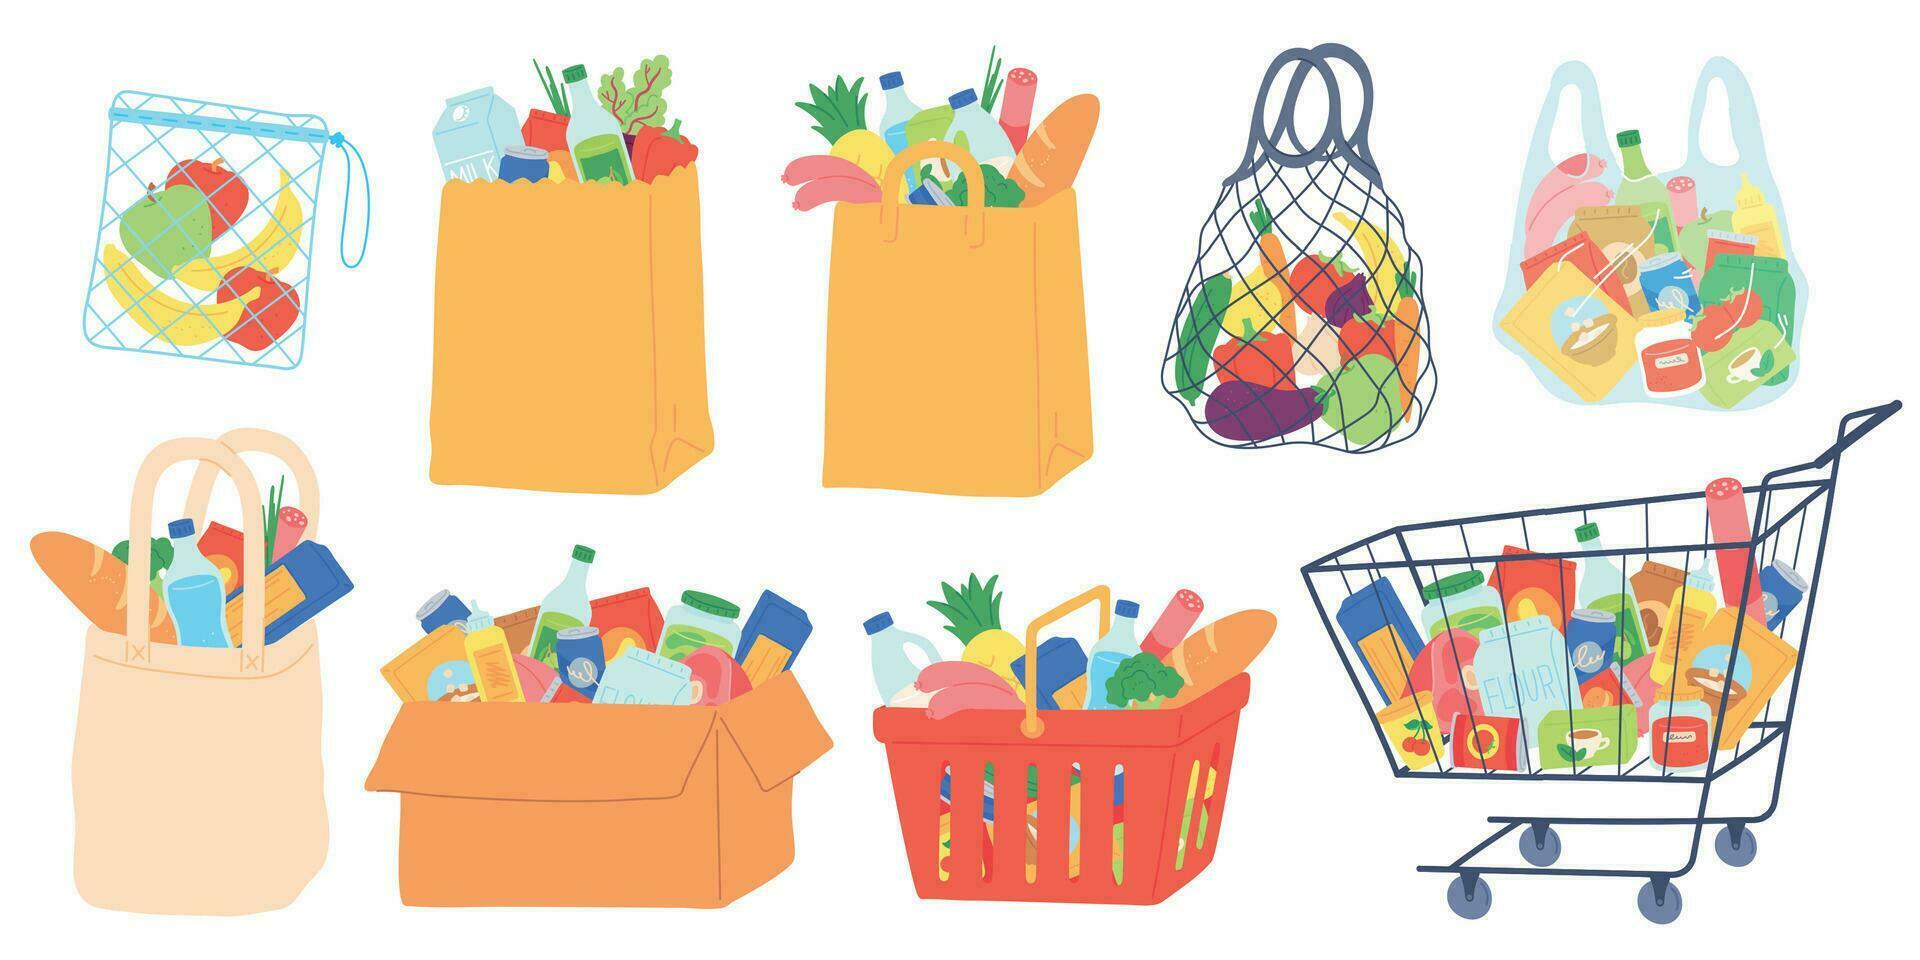 Grocery bags and carts. Shopping basket, paper and plastic packages, eco bag with organic food. Supermarket goods and groceries vector set